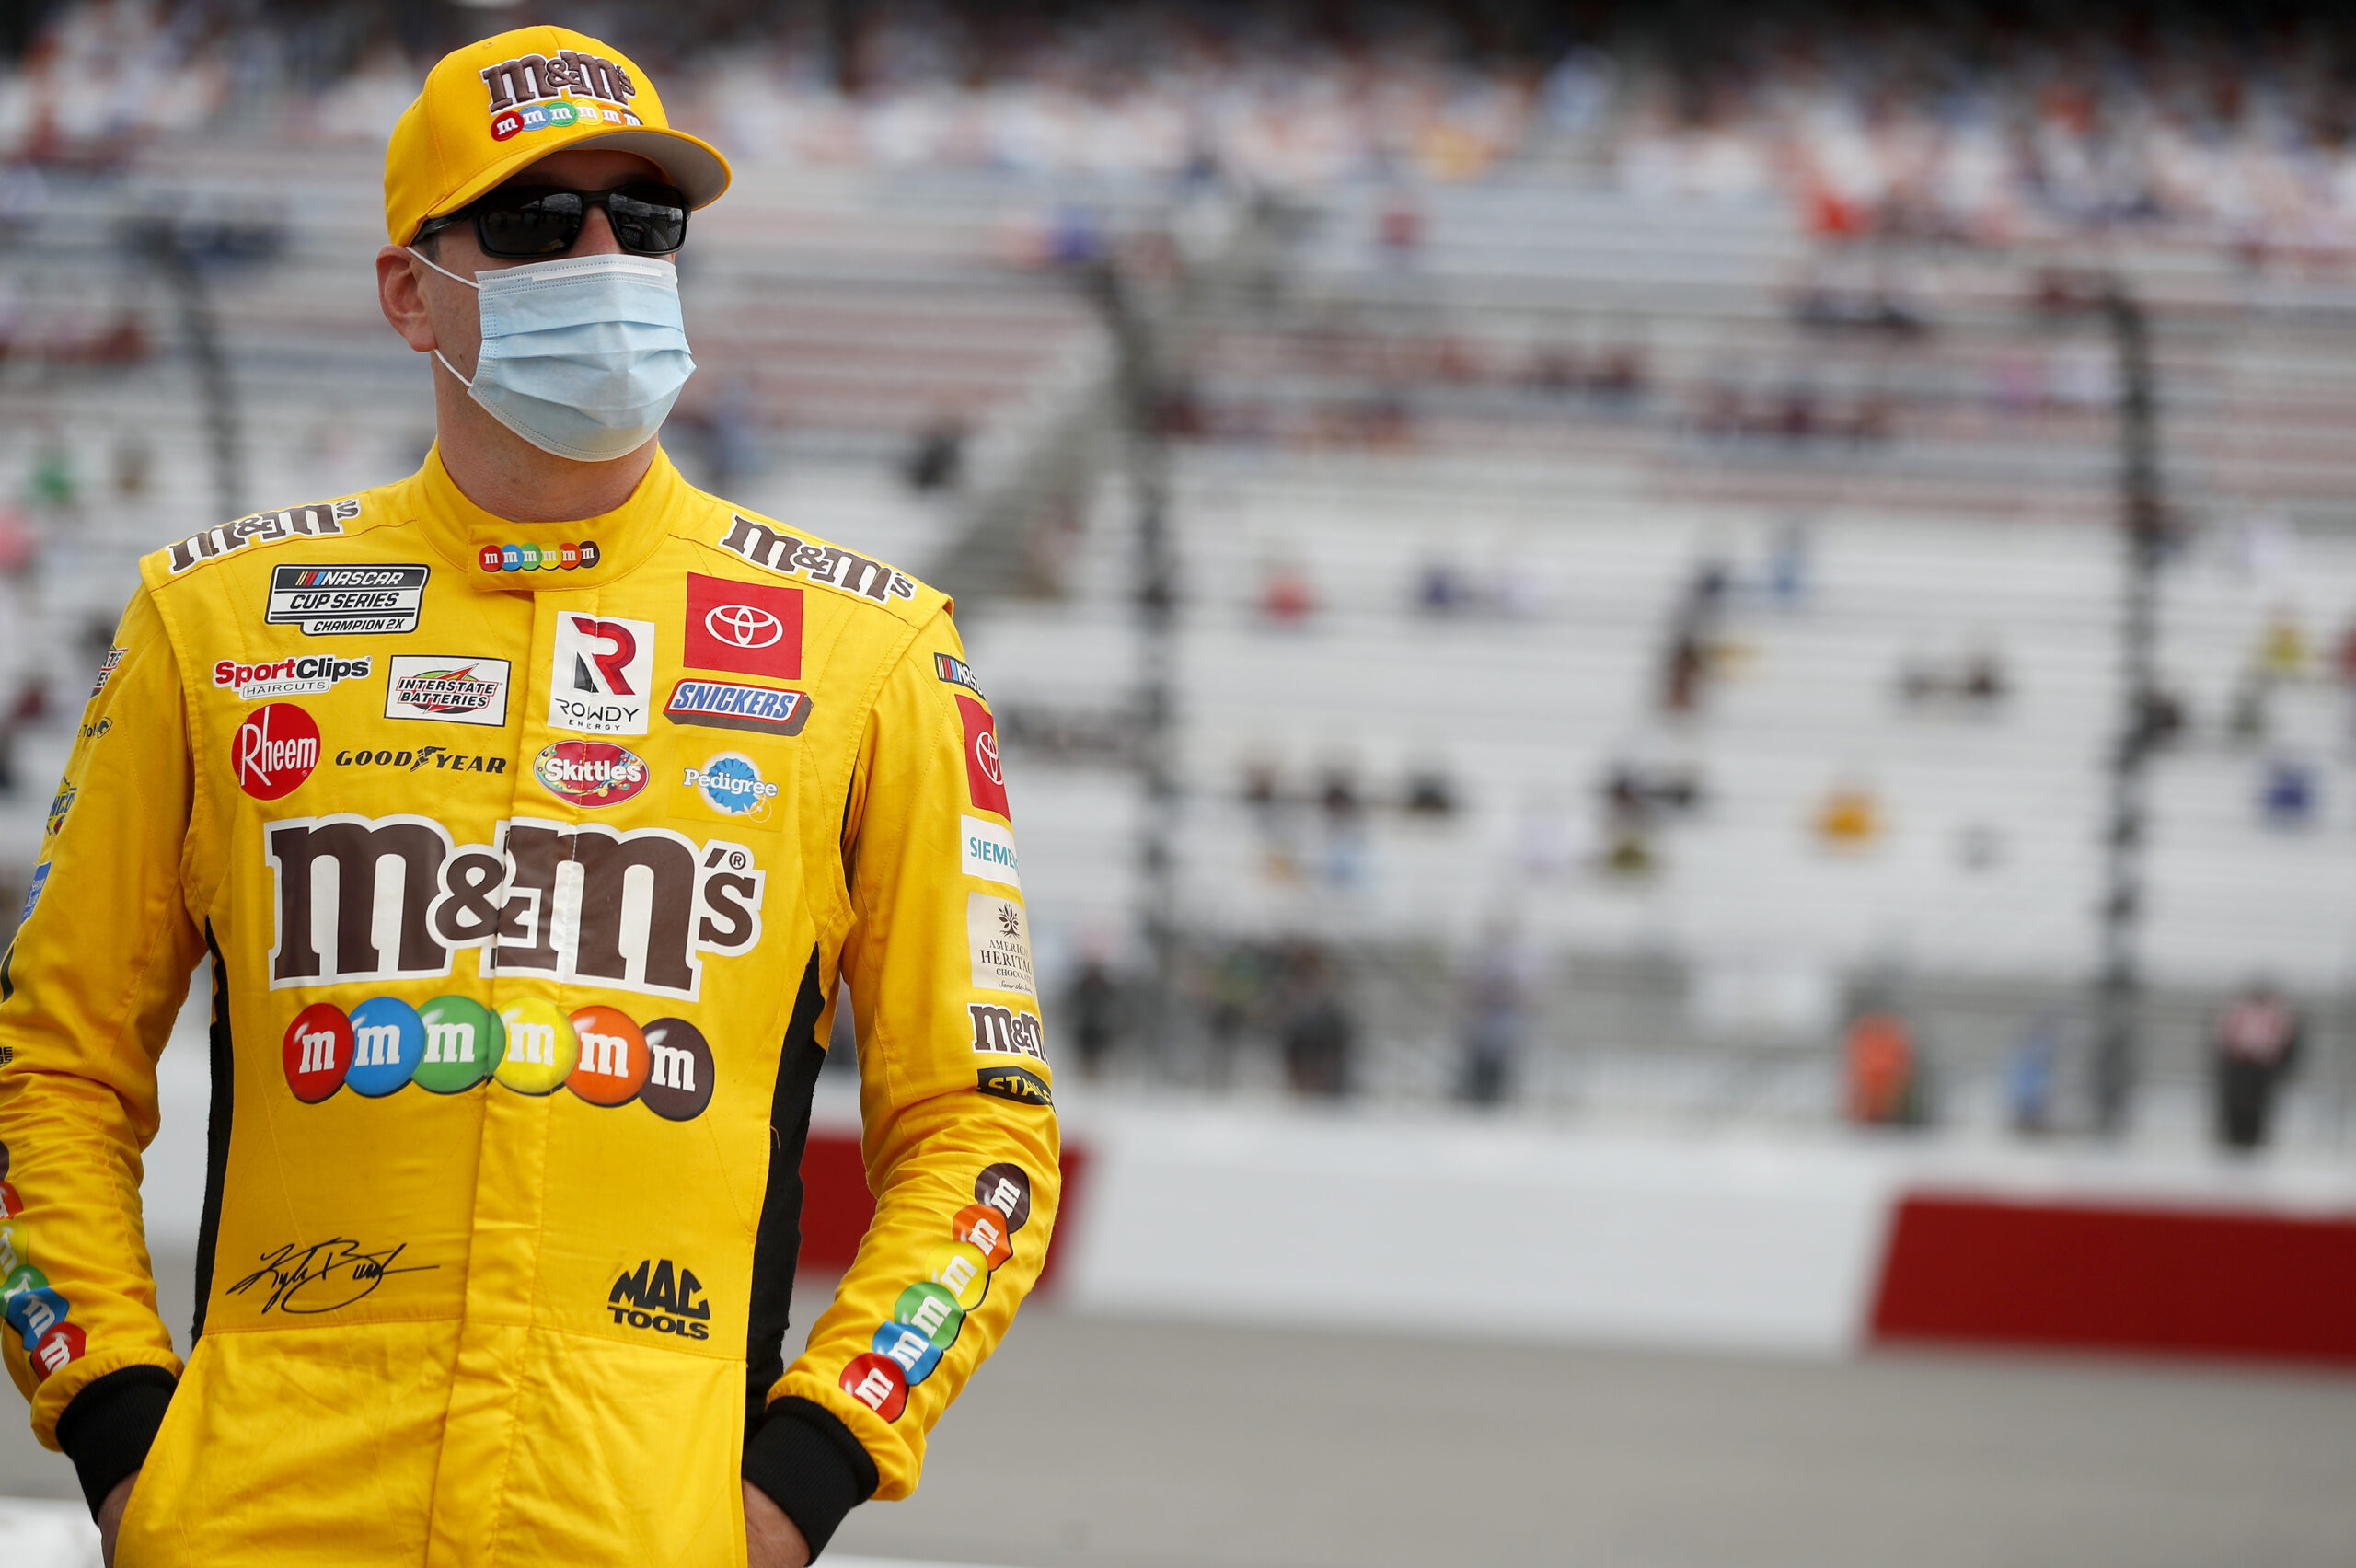 Generally speaking, Kyle Busch proves refreshing as a star racer and athlete with a genuine personality. (Photo: Joe Gibbs Racing)